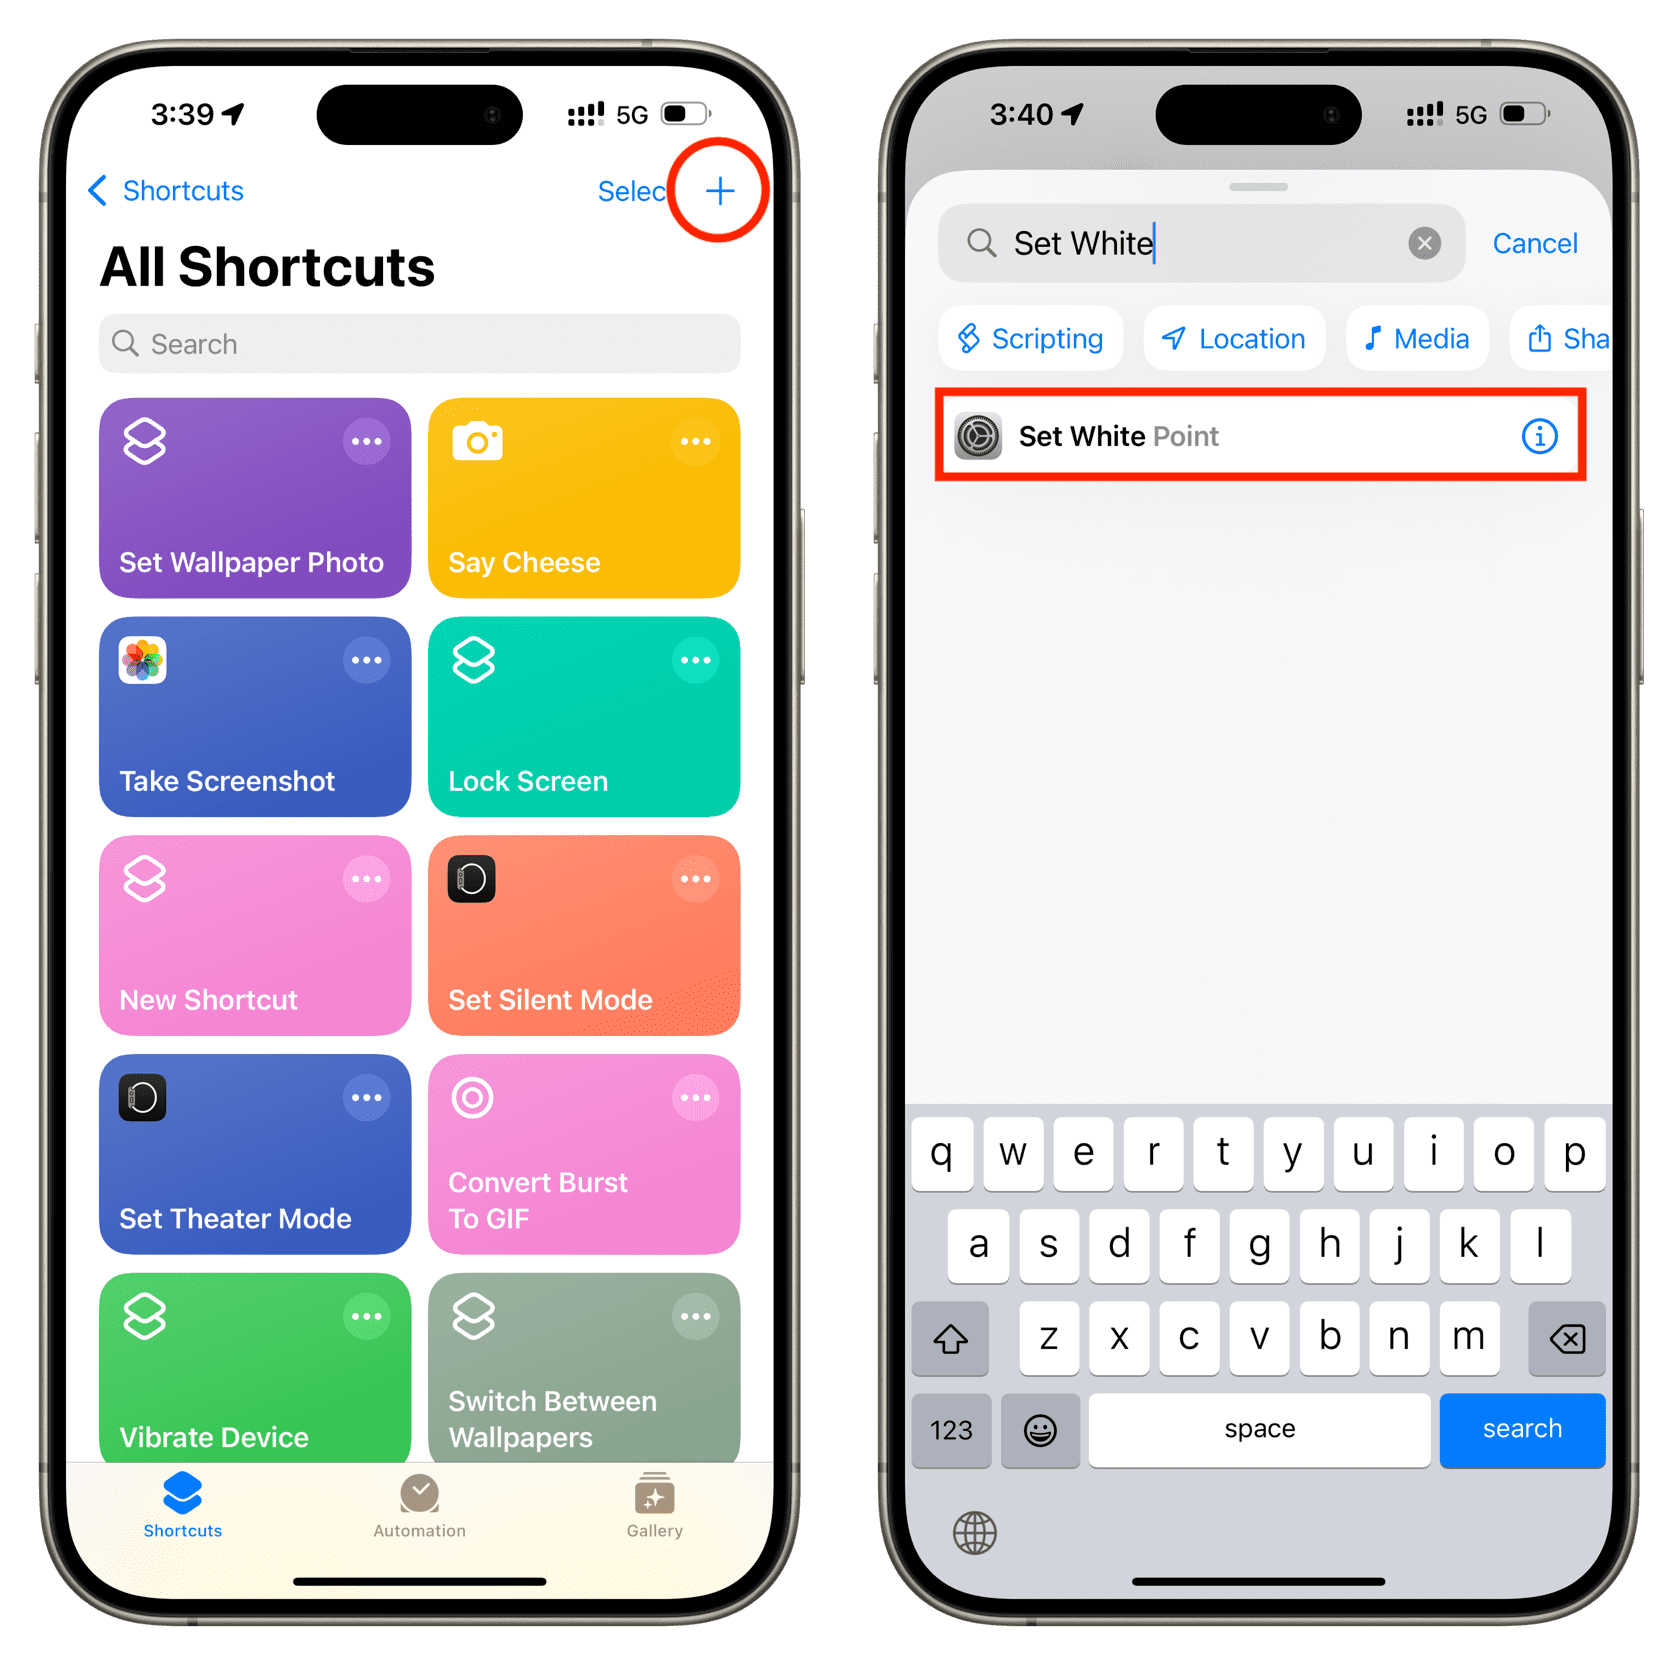 Create shortcut and add Set White Point action